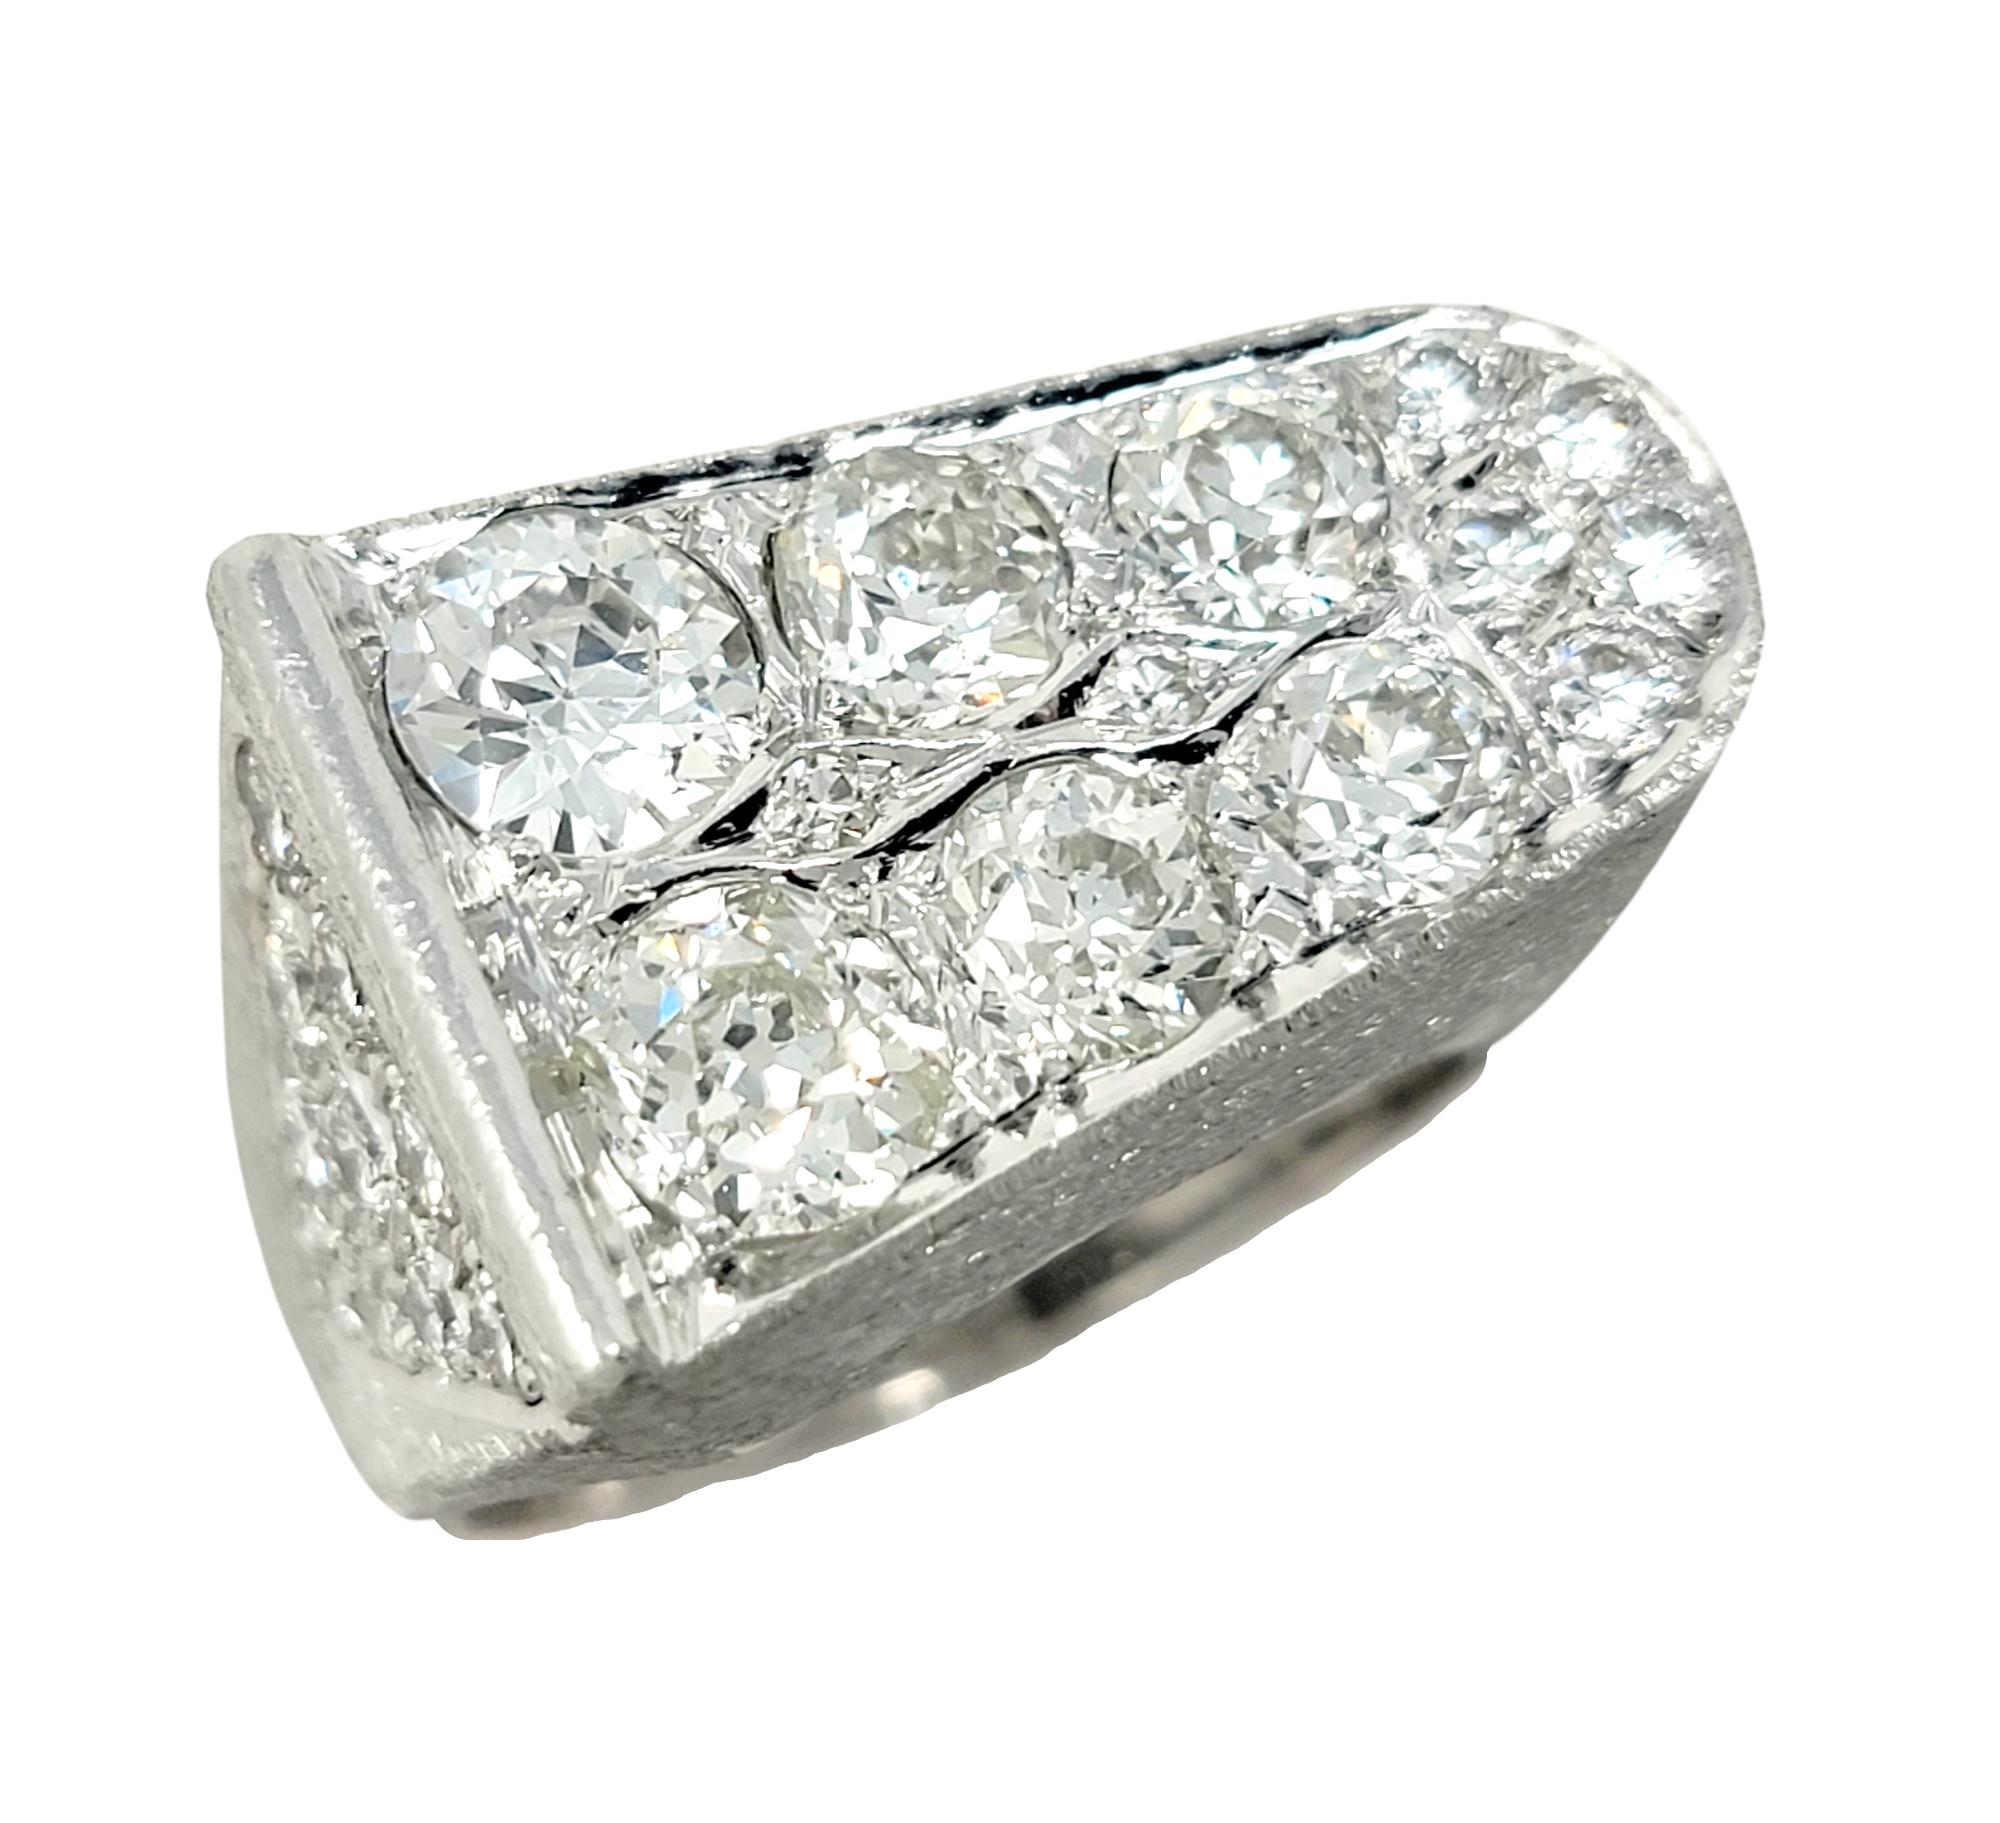 Ring size: 8.5

Bold and brilliant mens diamond band ring. This incredible piece features a sleek, contemporary style with an asymmetrical design. Six incredible, icy white Old European cut diamonds decorate the top of the piece, while additional